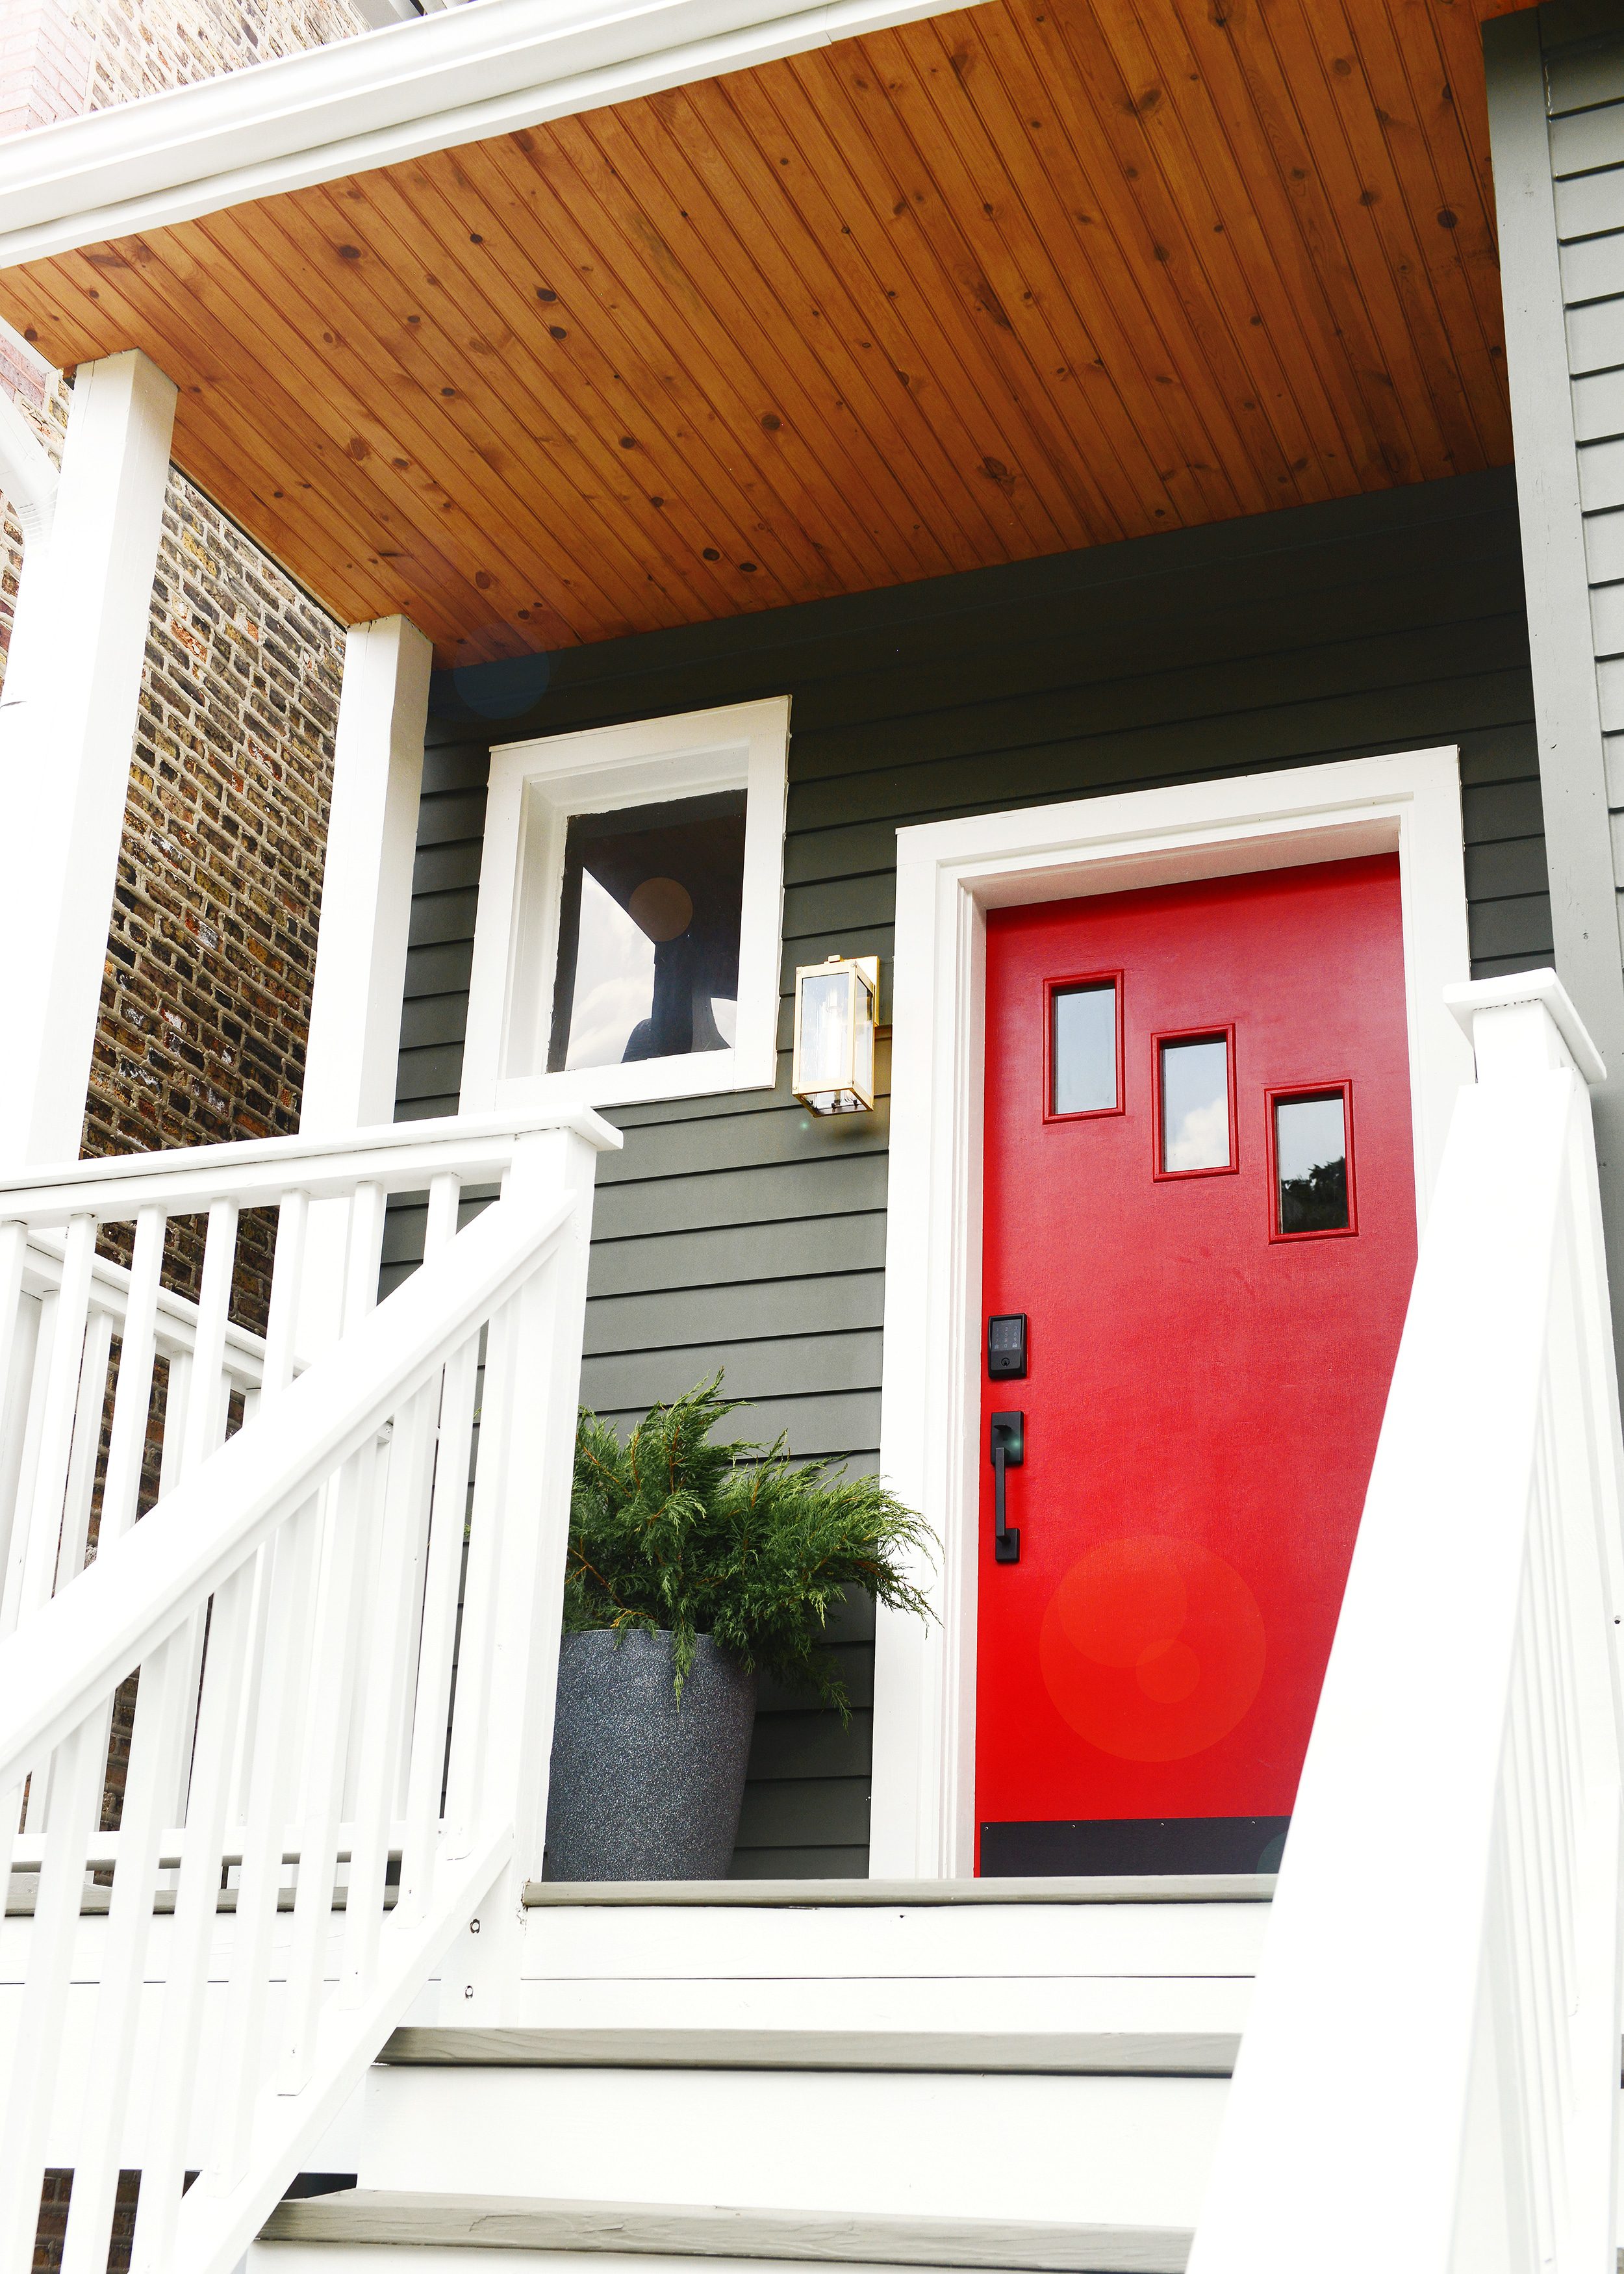 Schlage Encode smart lock on a bright red front door | via Yellow Brick Home